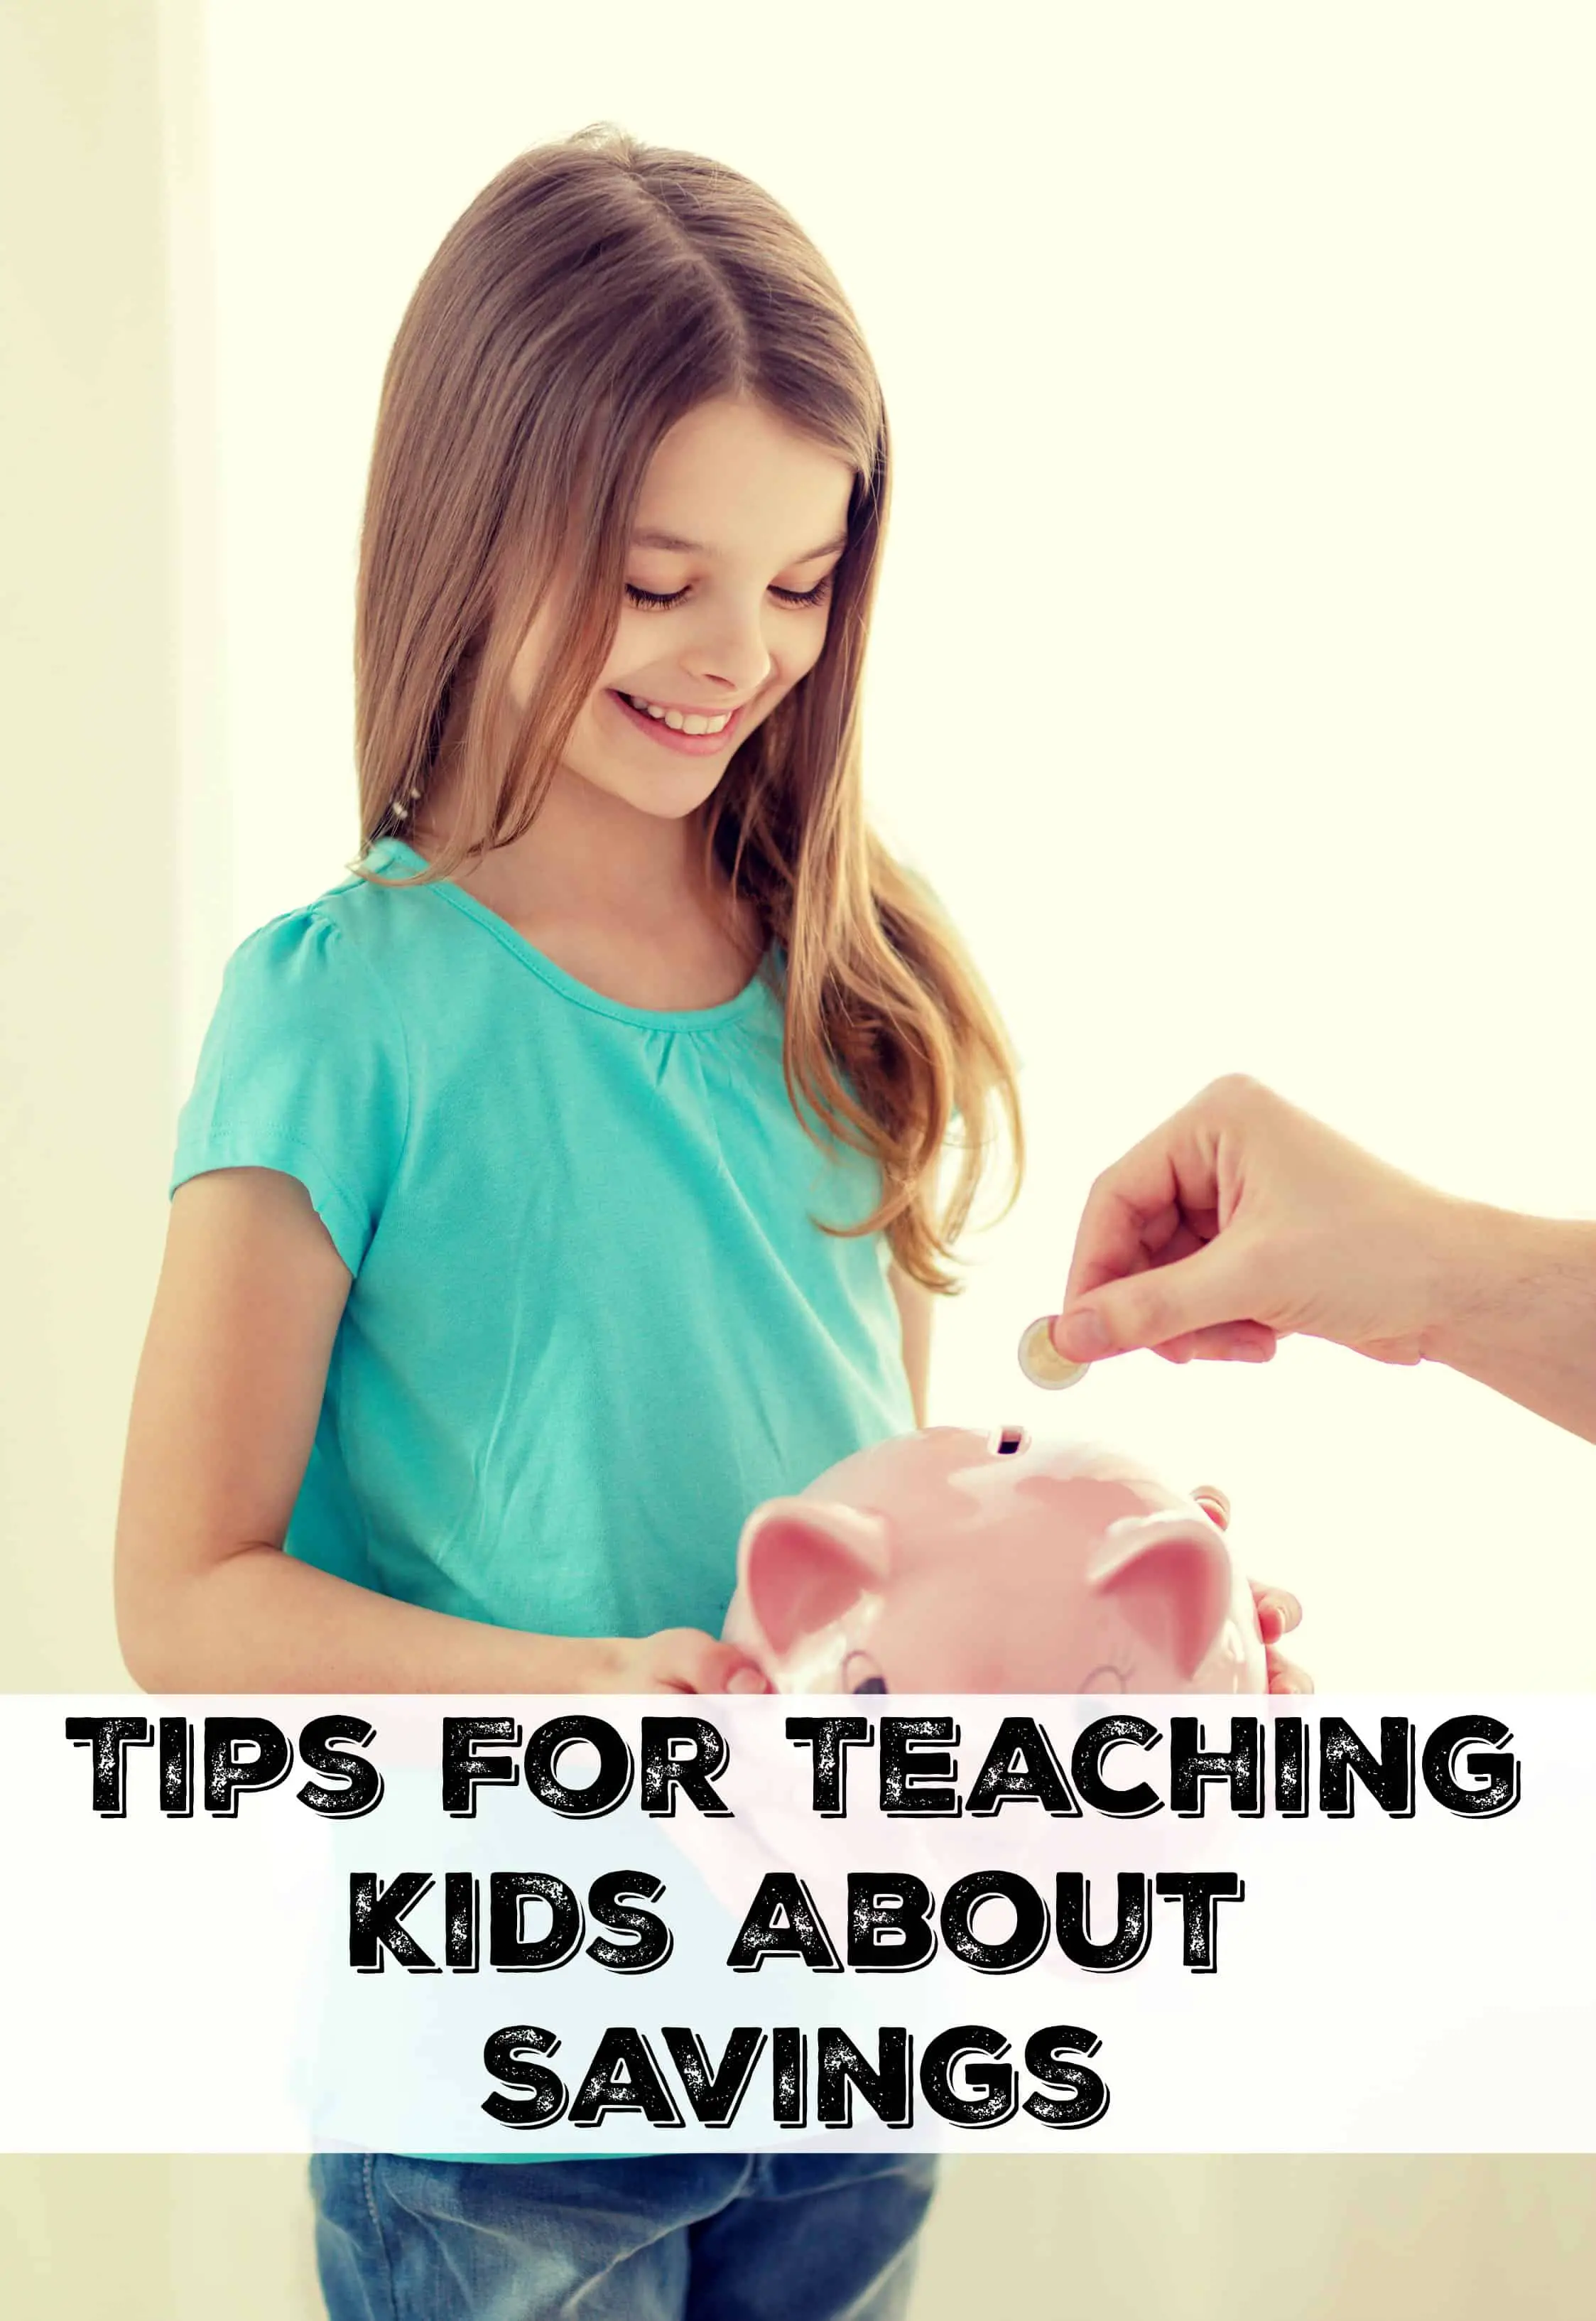 Tips For Teaching Kids About Savings - these are great tips if you want to start teaching your kids about saving money and more!